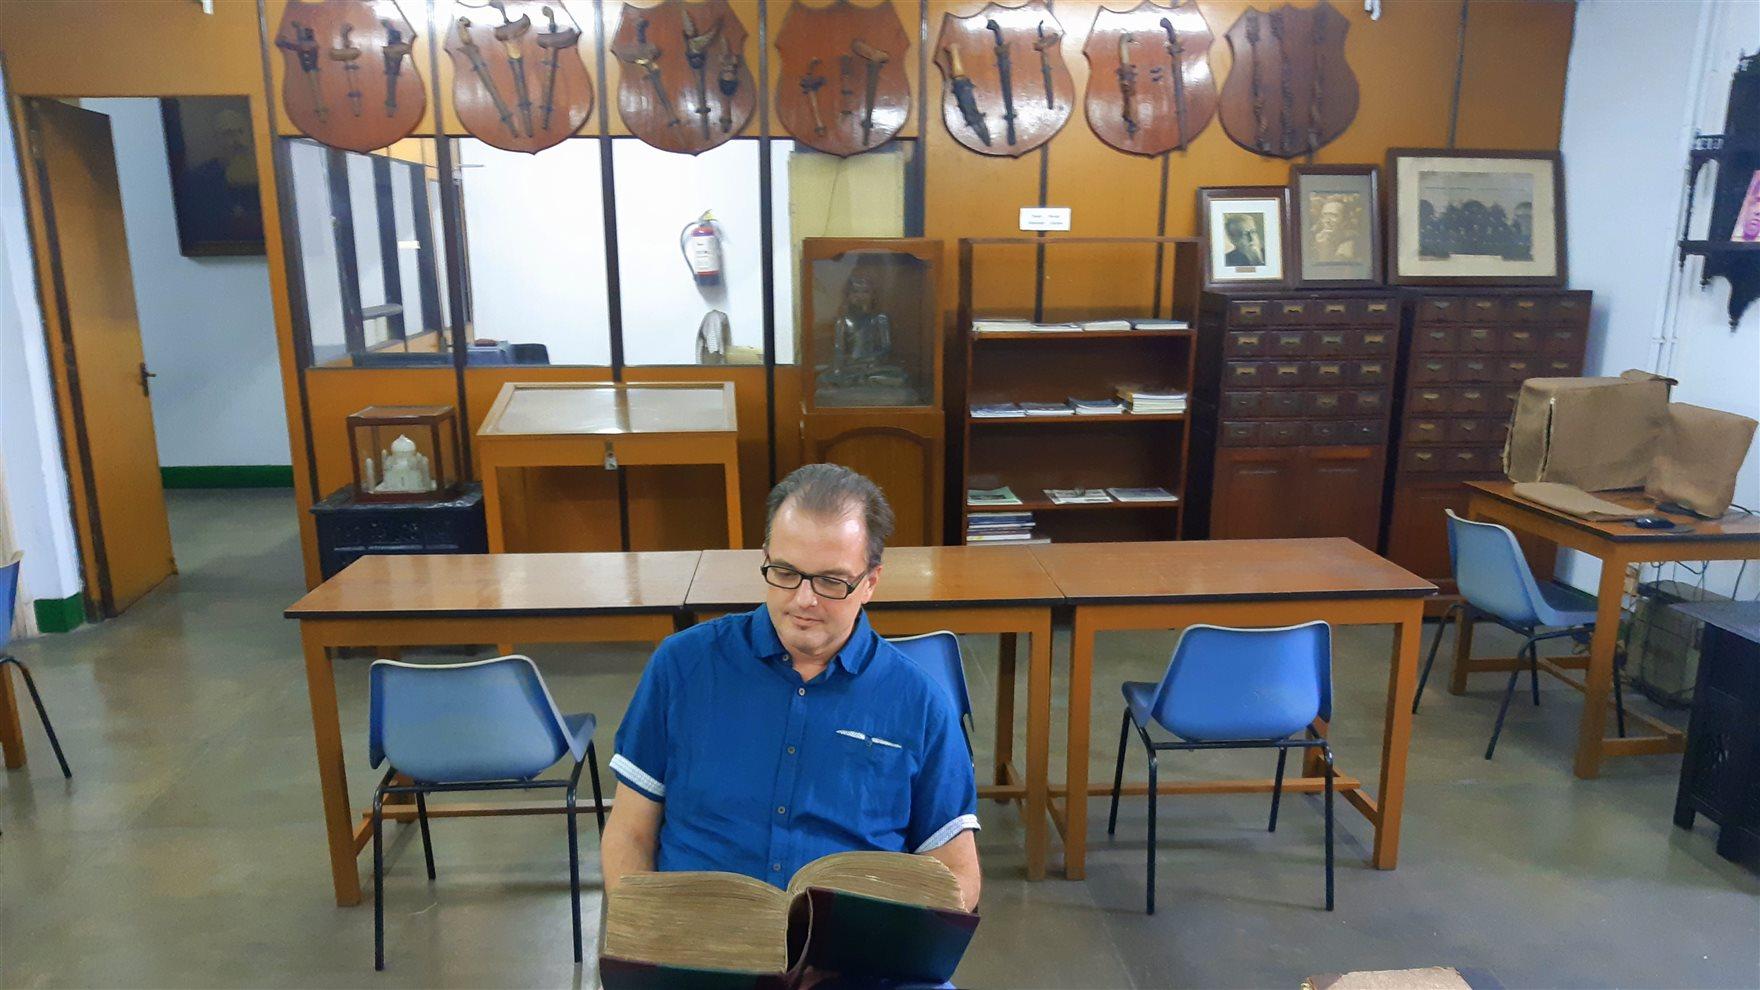 A man in a blue shirt seated at a table looking at a large book in a library.